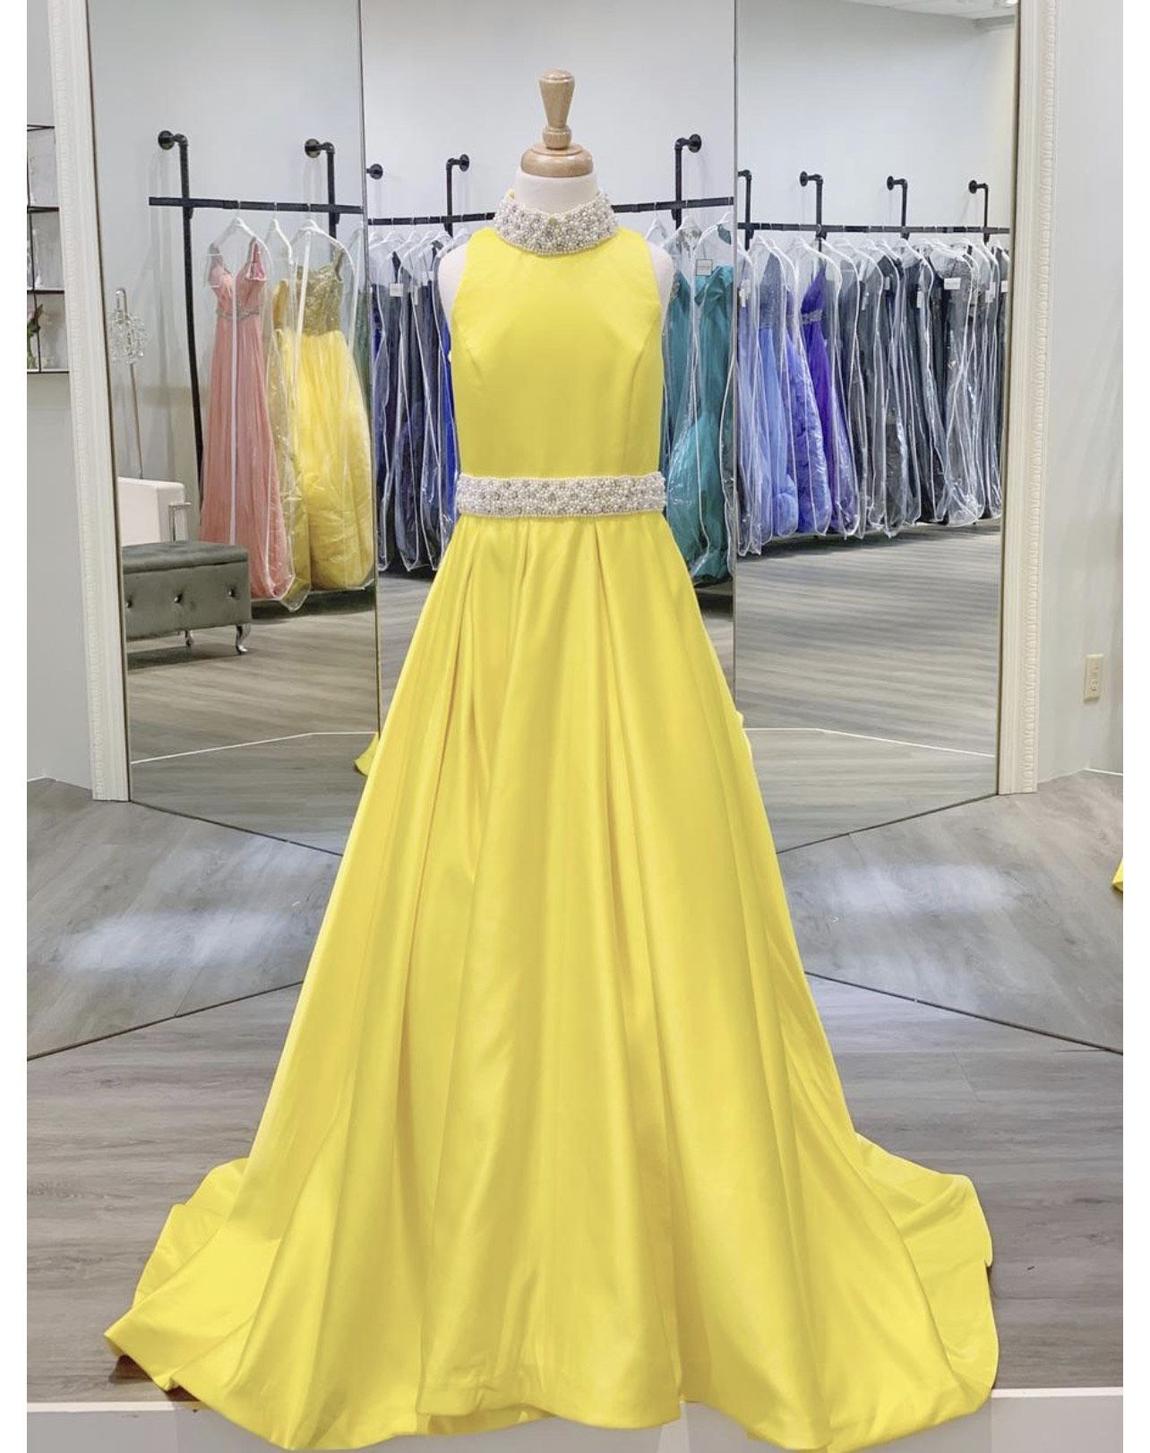 Ashley Lauren Girls Size 14 High Neck Sequined Yellow Ball Gown on Queenly